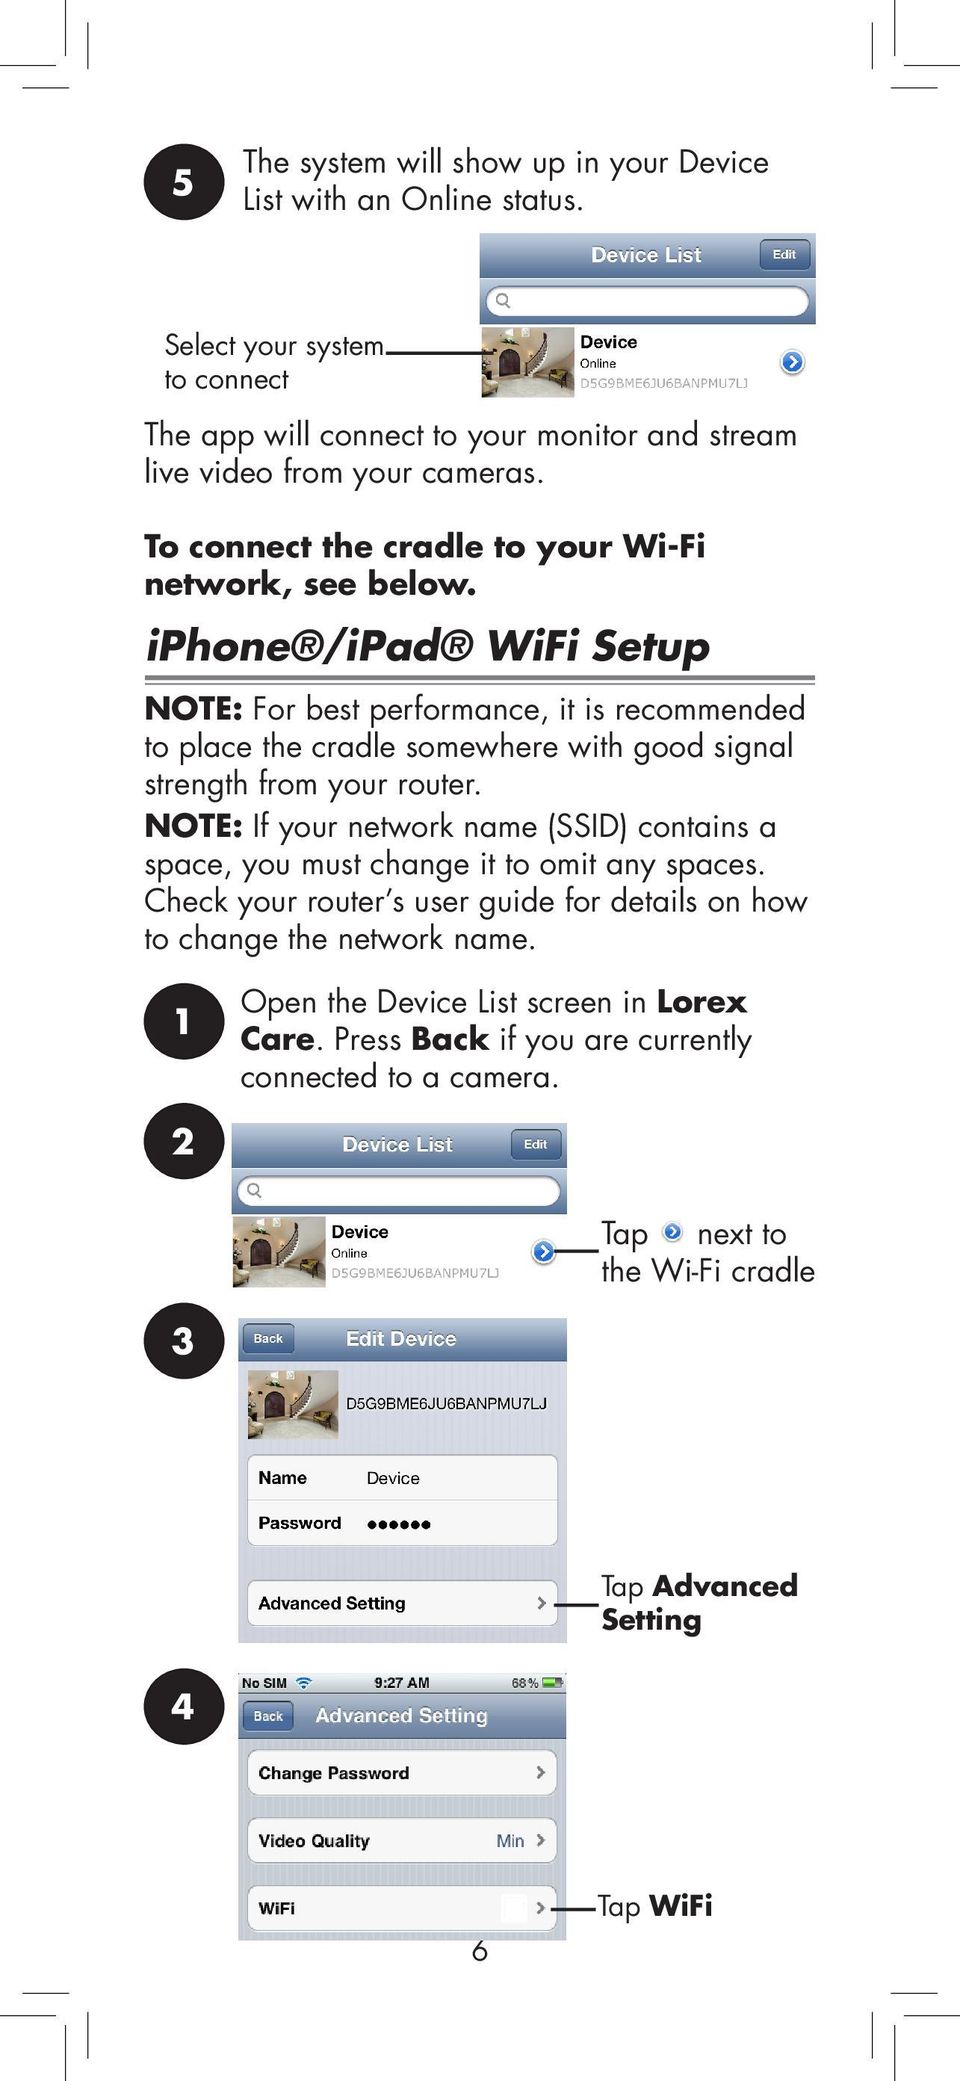 iphone /ipad WiFi Setup NOTE: For best performance, it is recommended to place the cradle somewhere with good signal strength from your router.